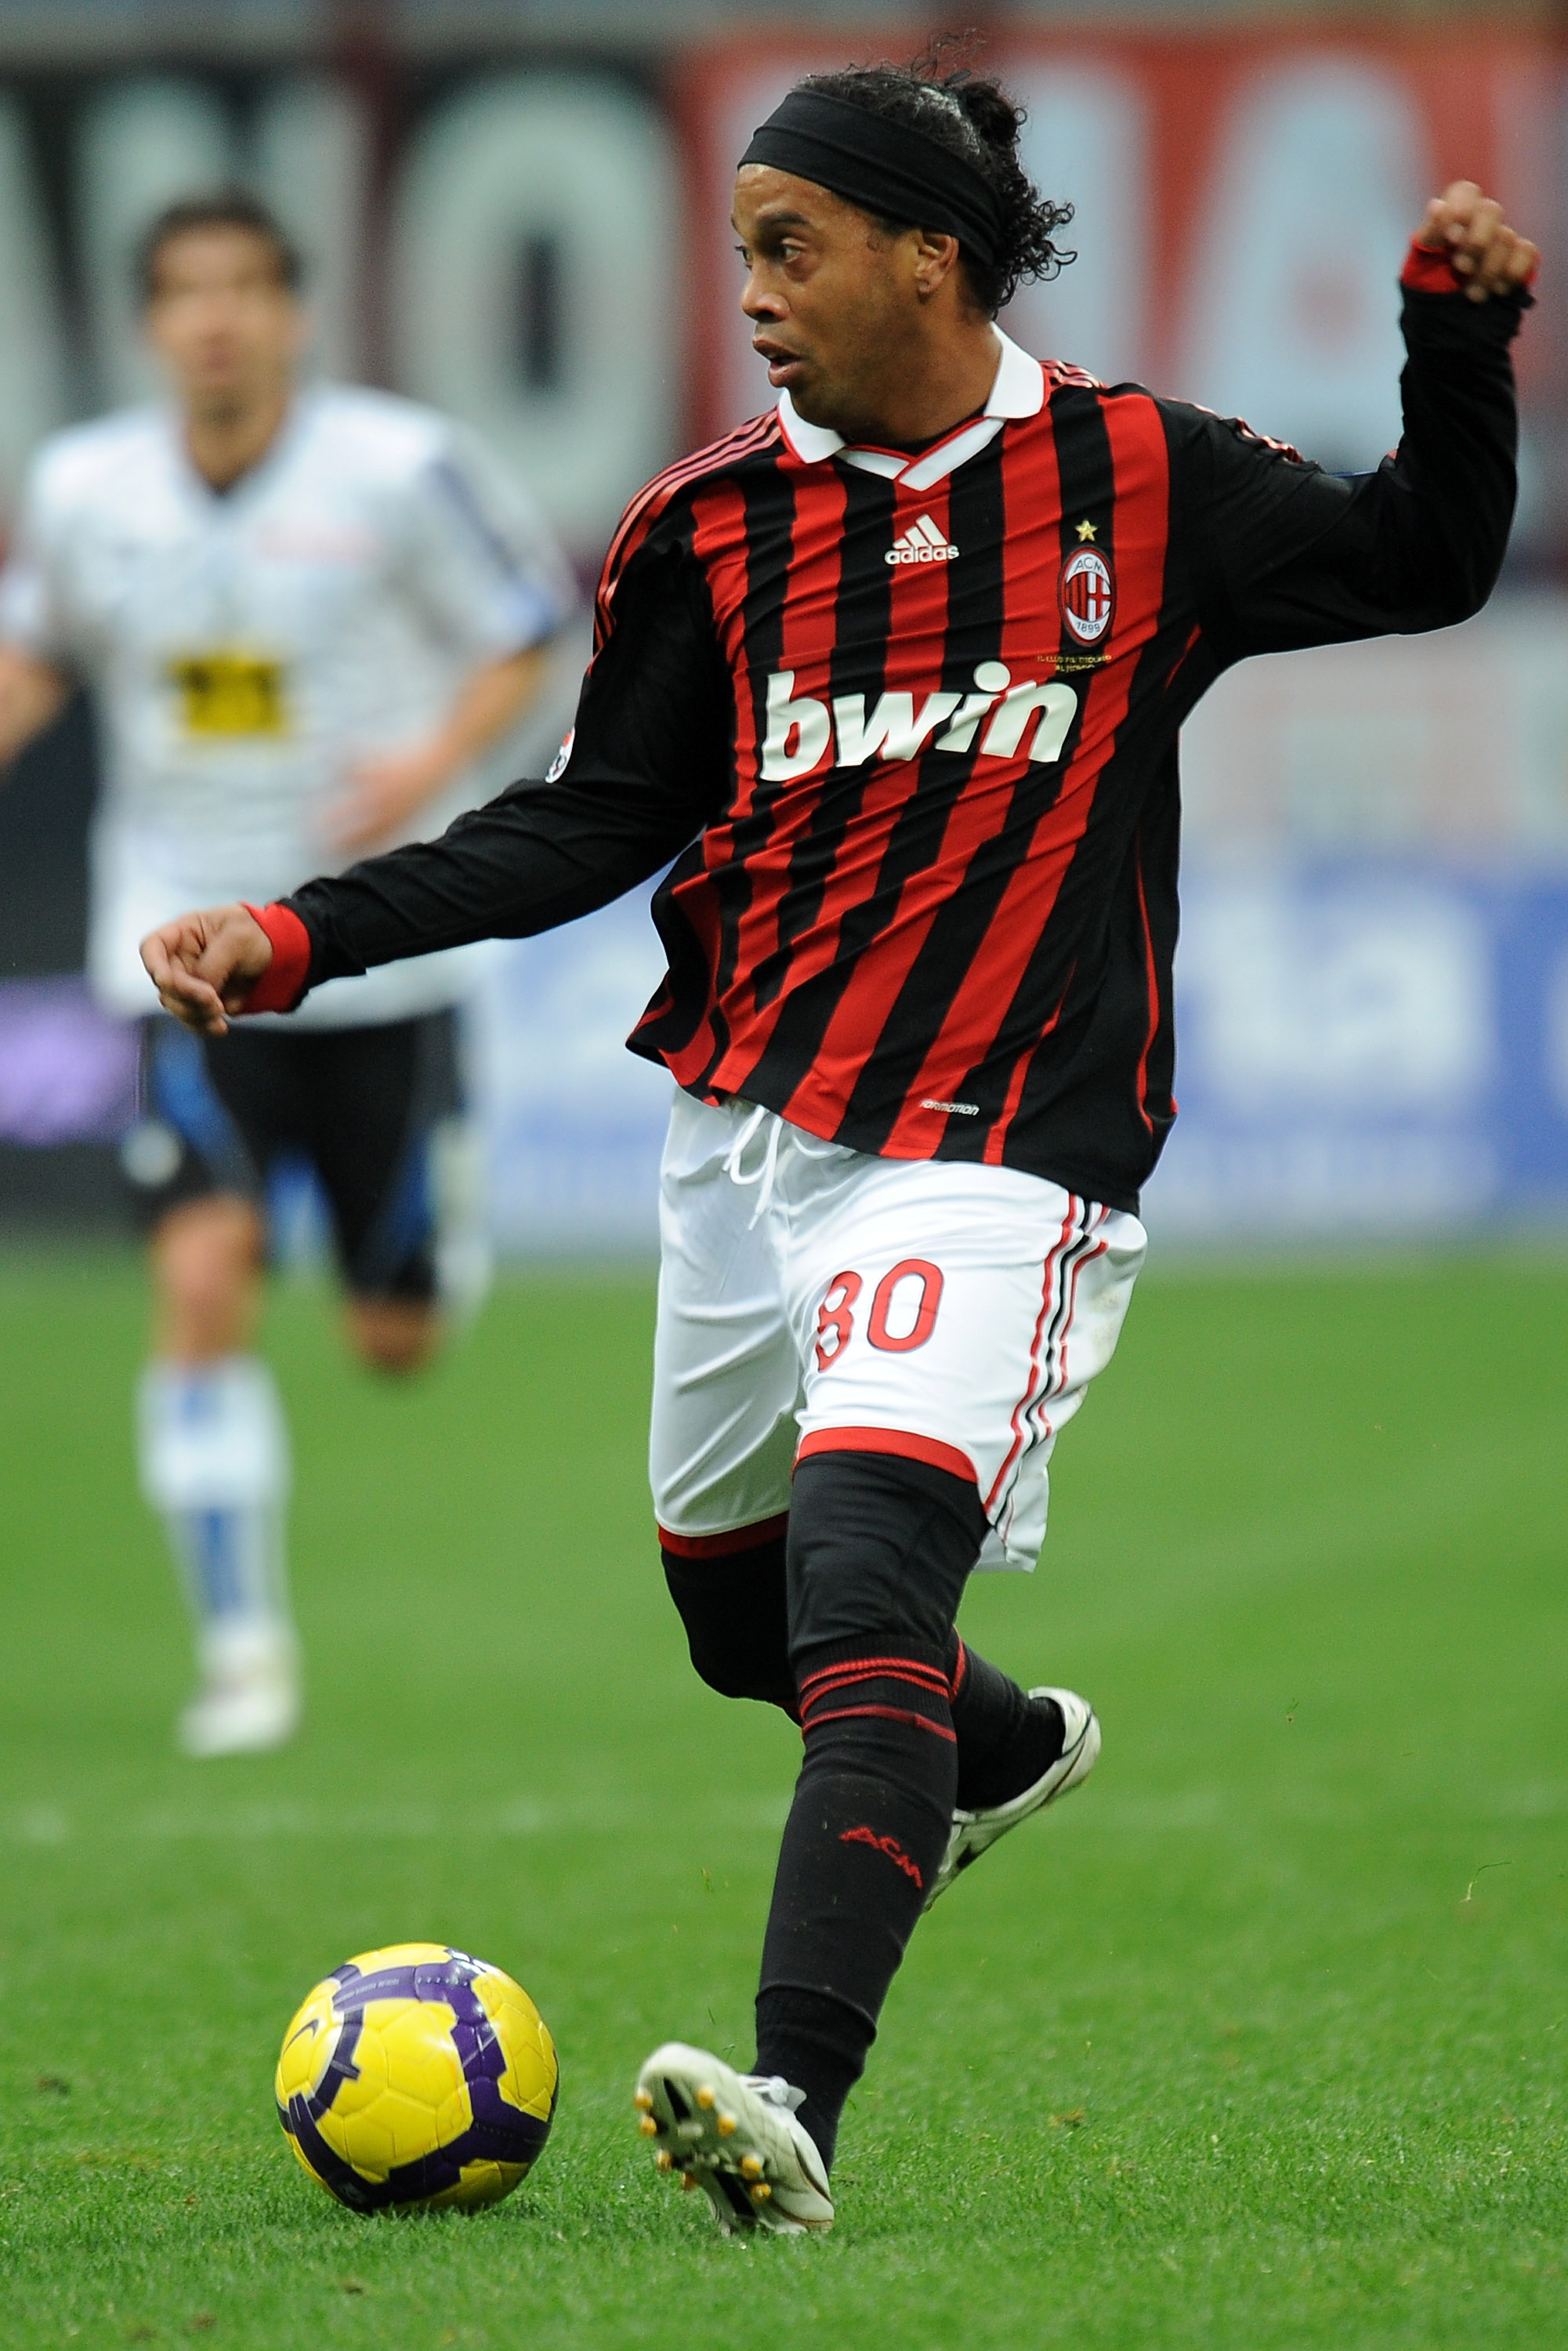 MILAN, ITALY - FEBRUARY 28:  Ronaldinho of Milan in action during the Serie A match between Milan and Atalanta at Stadio Giuseppe Meazza on February 28, 2010 in Milan, Italy.  (Photo by Tullio M. Puglia/Getty Images)